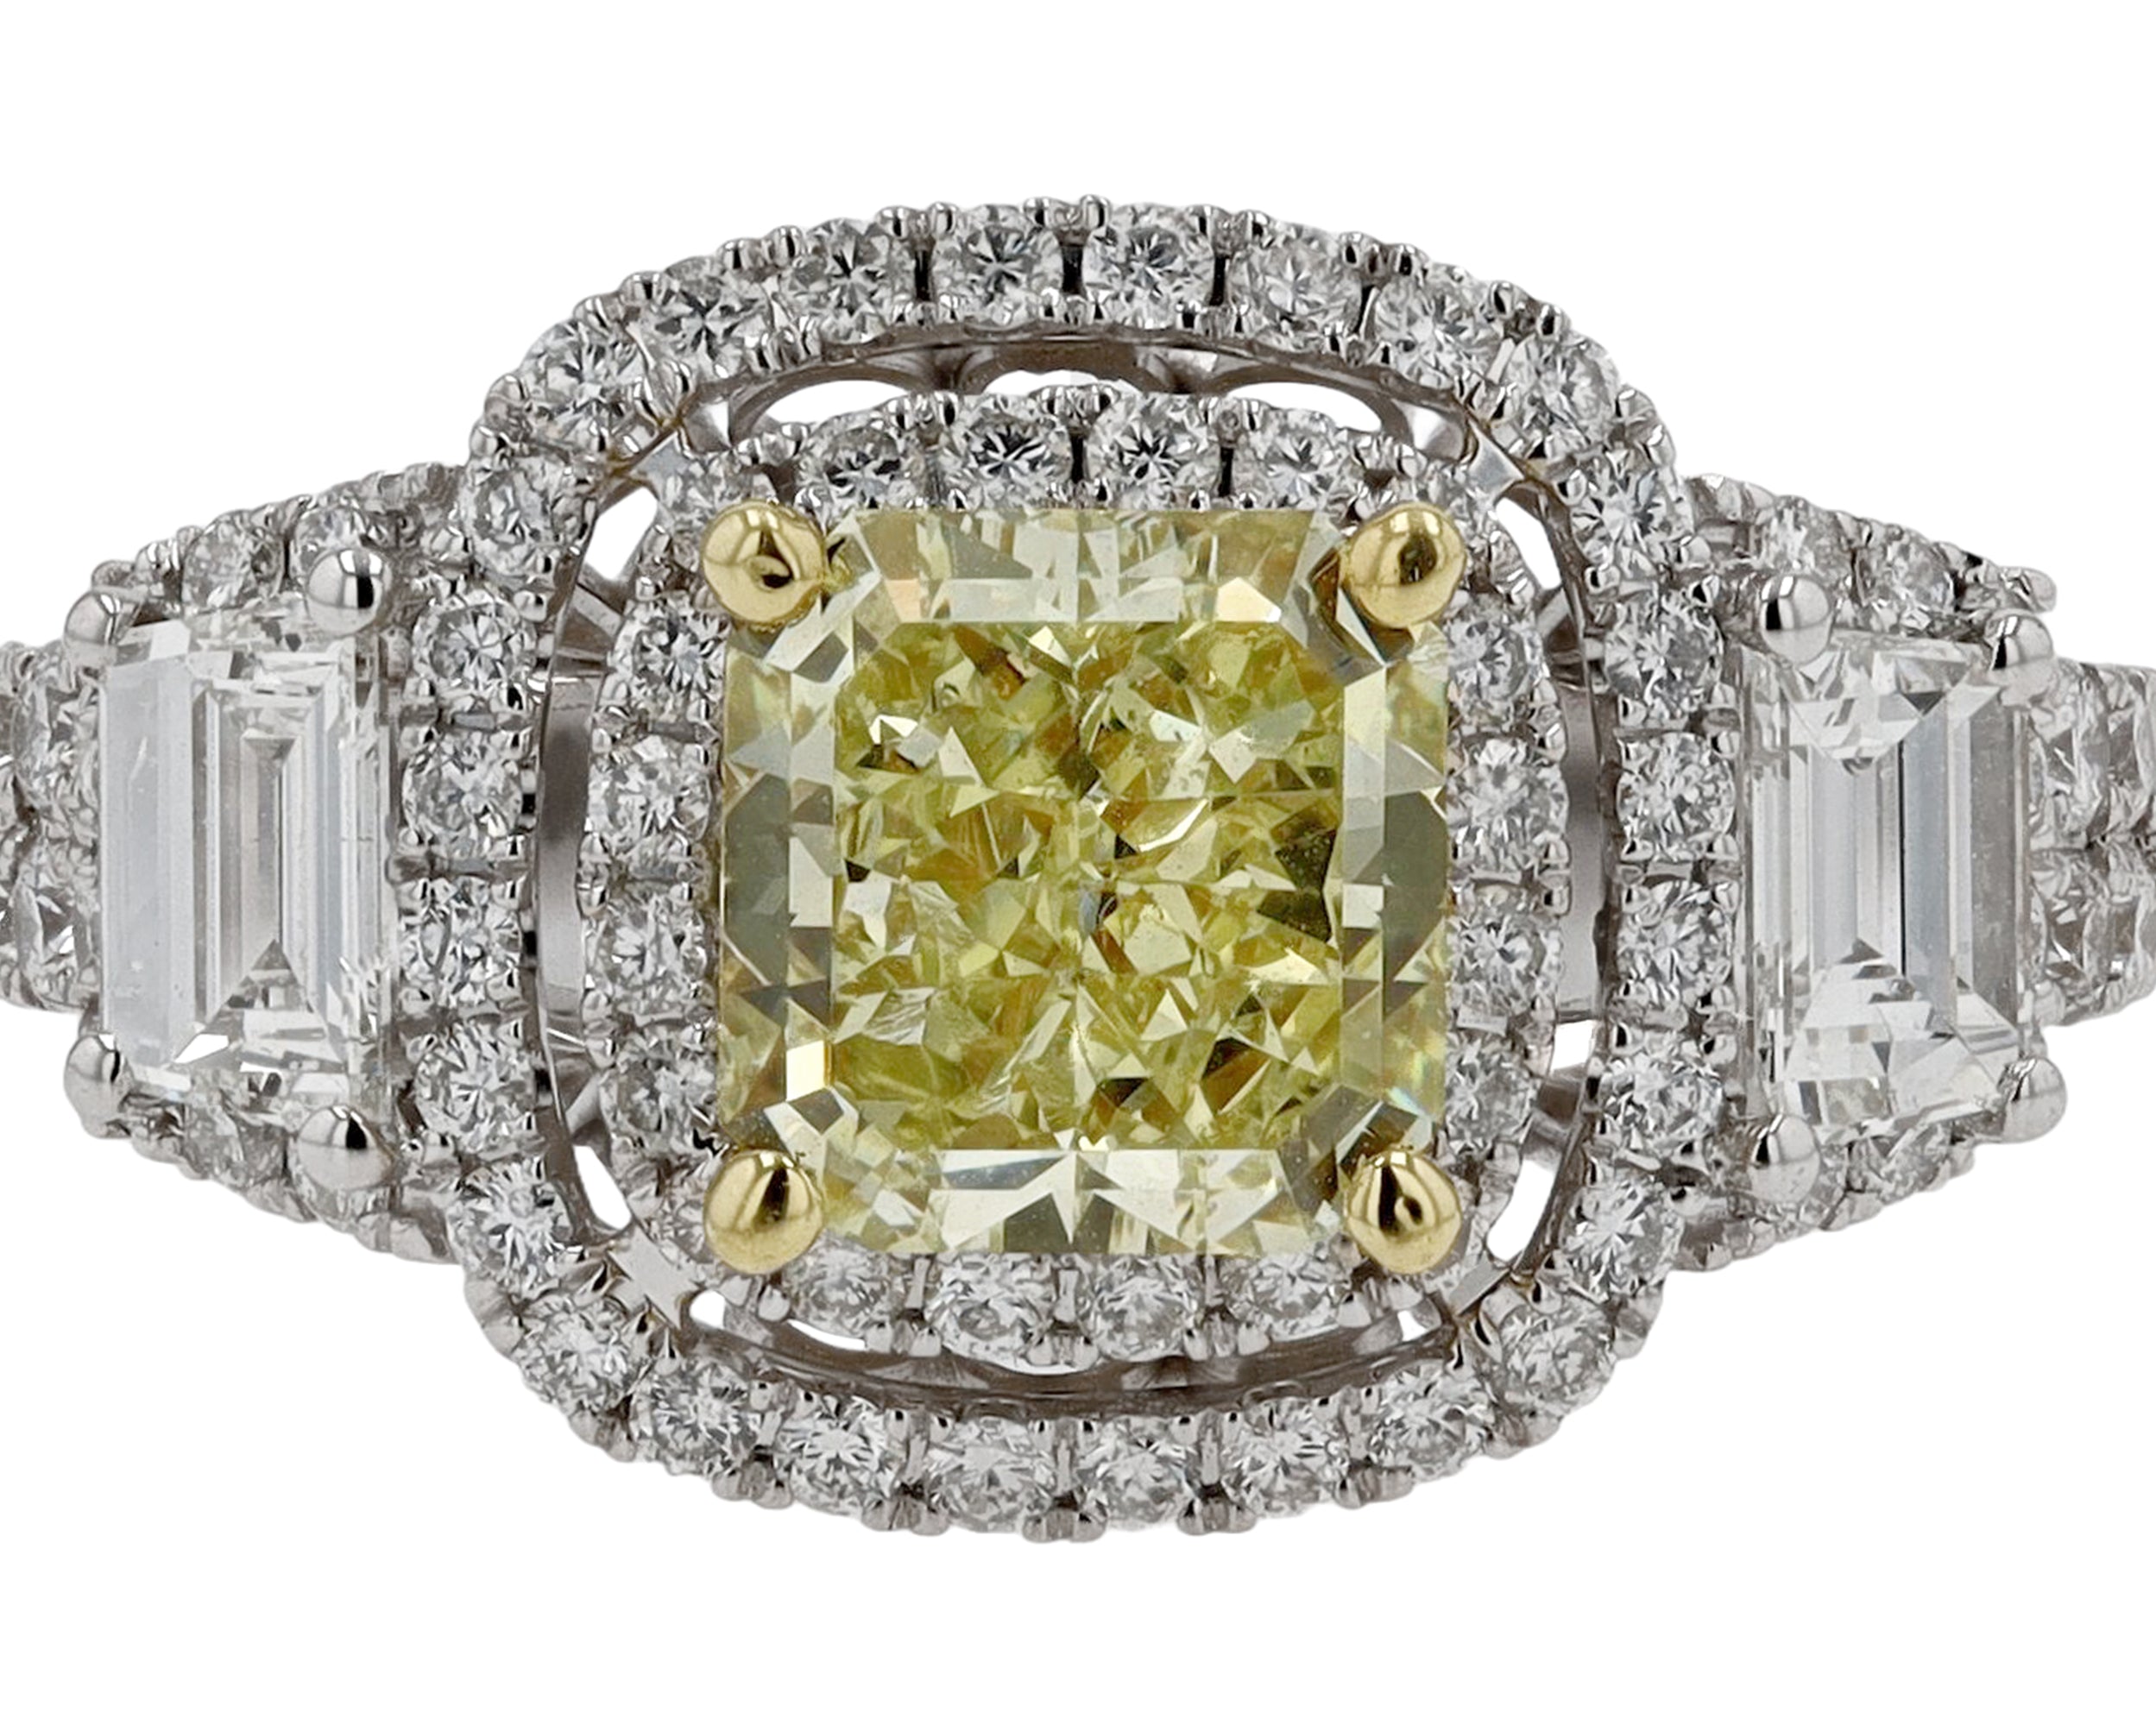 Contemporary Estate GIA Certified 1.55 Carat Fancy Yellow Diamond Engagement Ring